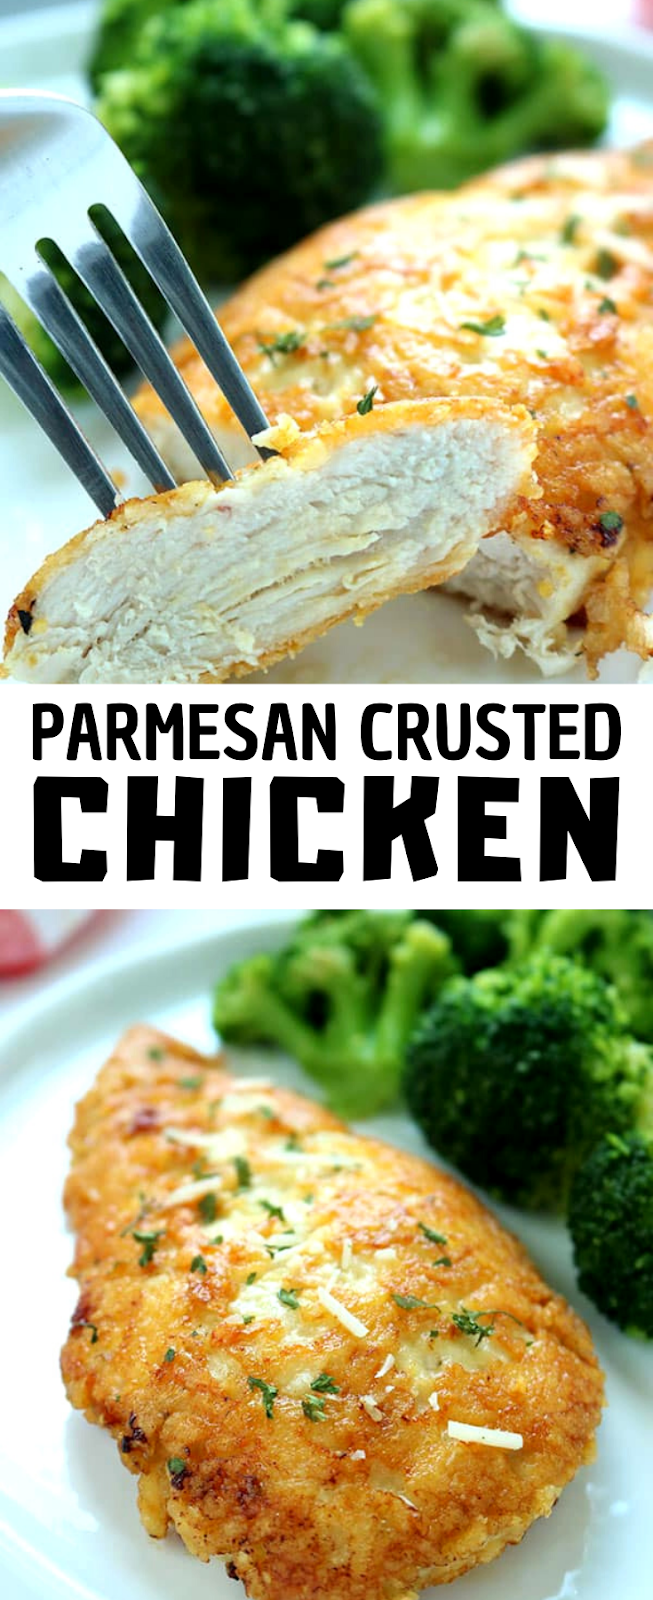 Parmesan Crusted Chicken